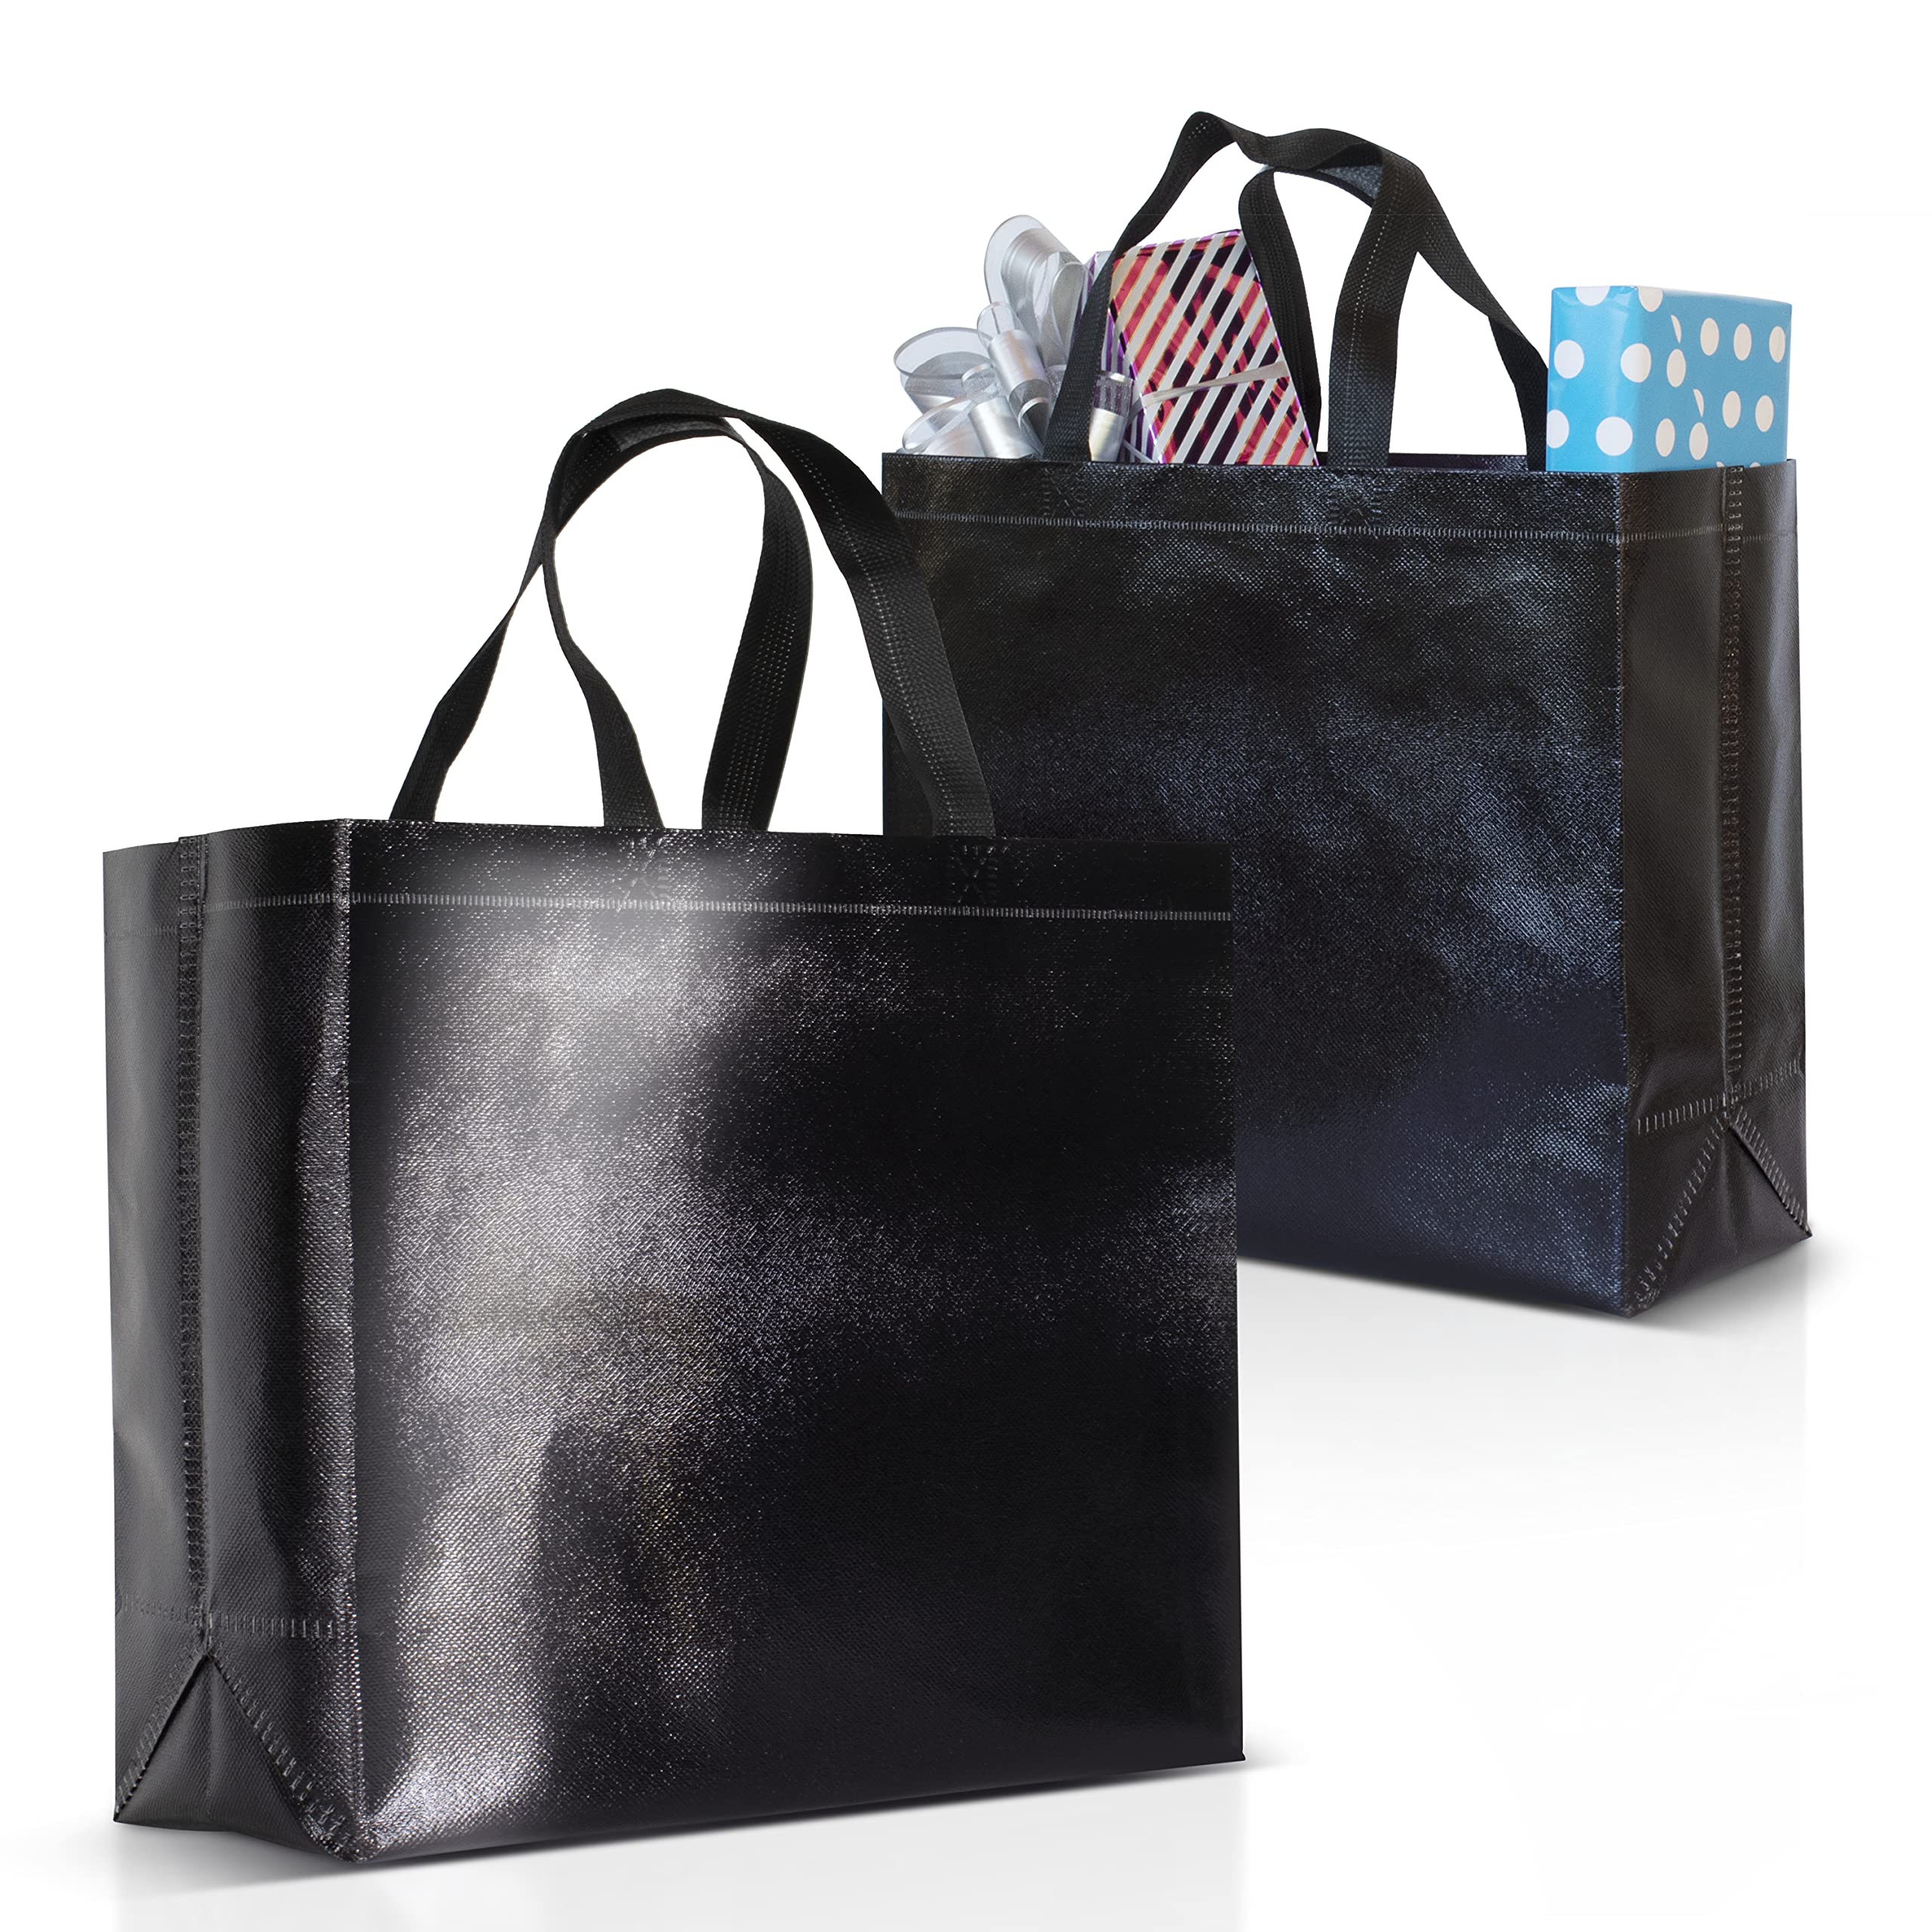 Nush Nush Black Gift Bags Large Size - Set of 12 Shiny Black Reusable Gift  Bags With a Glossy Finish - Perfect As Black Goodie B